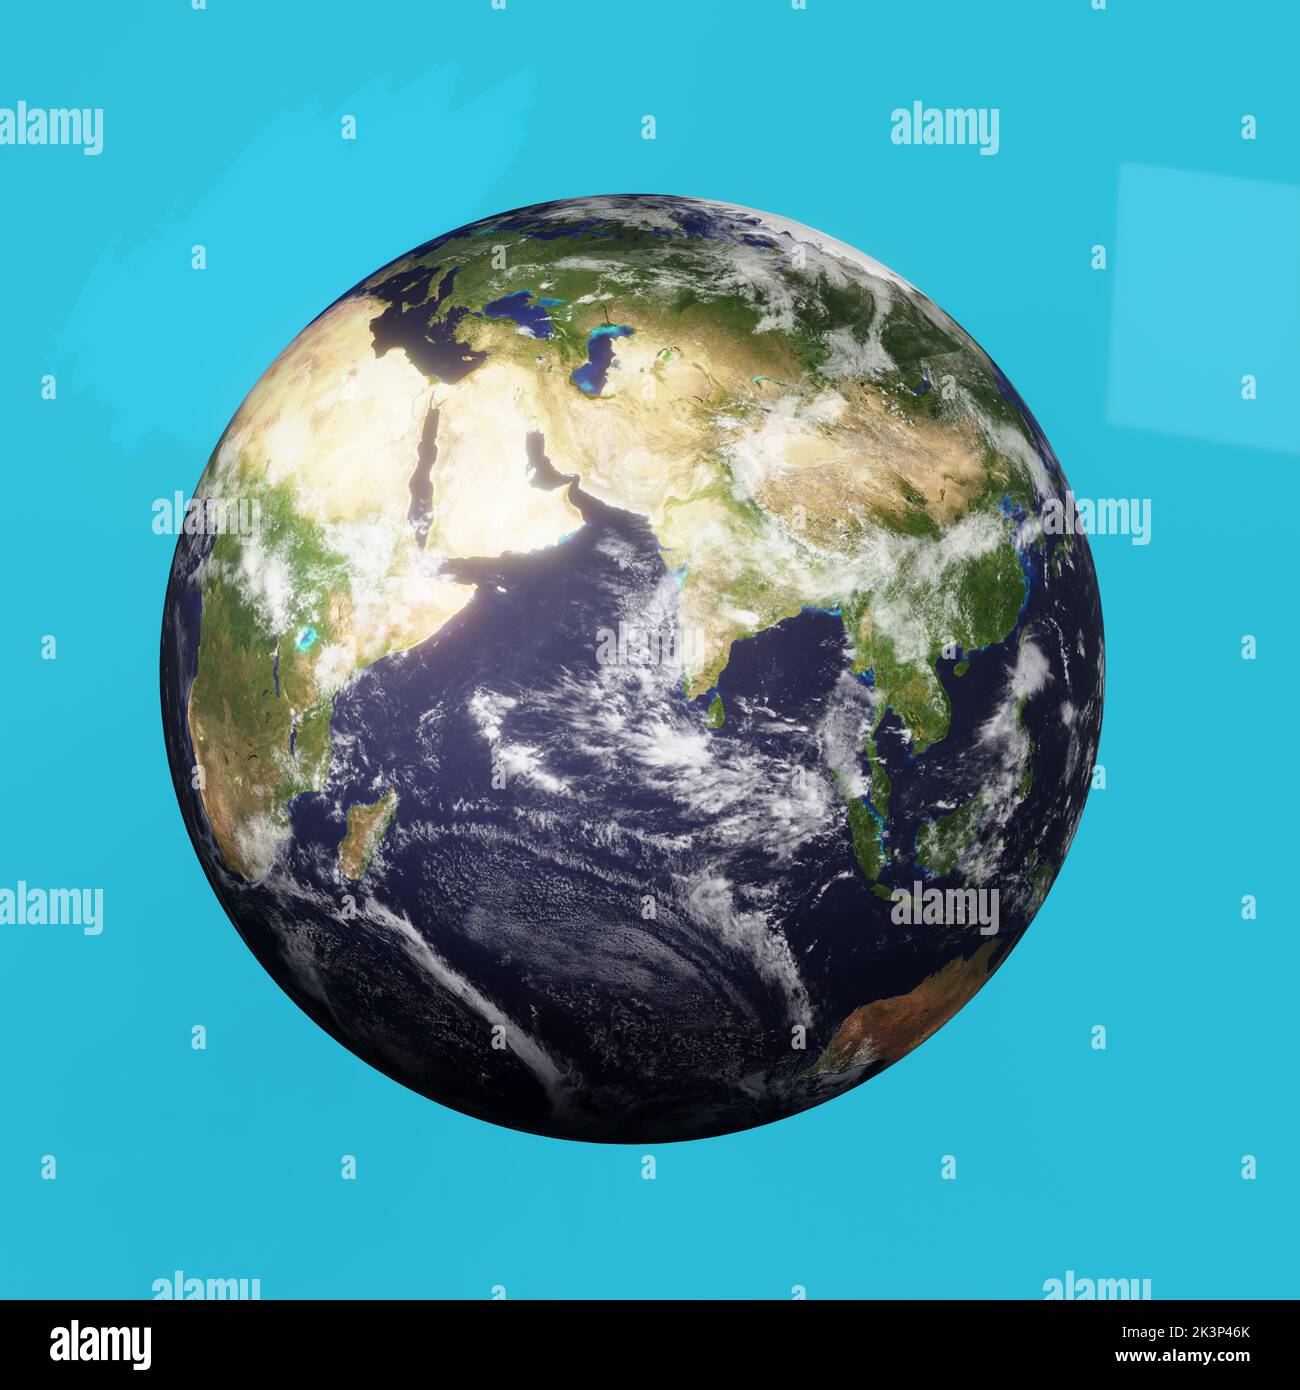 Globe earth 3d Illustration stock image Earth Map Satellite View Stock Photo